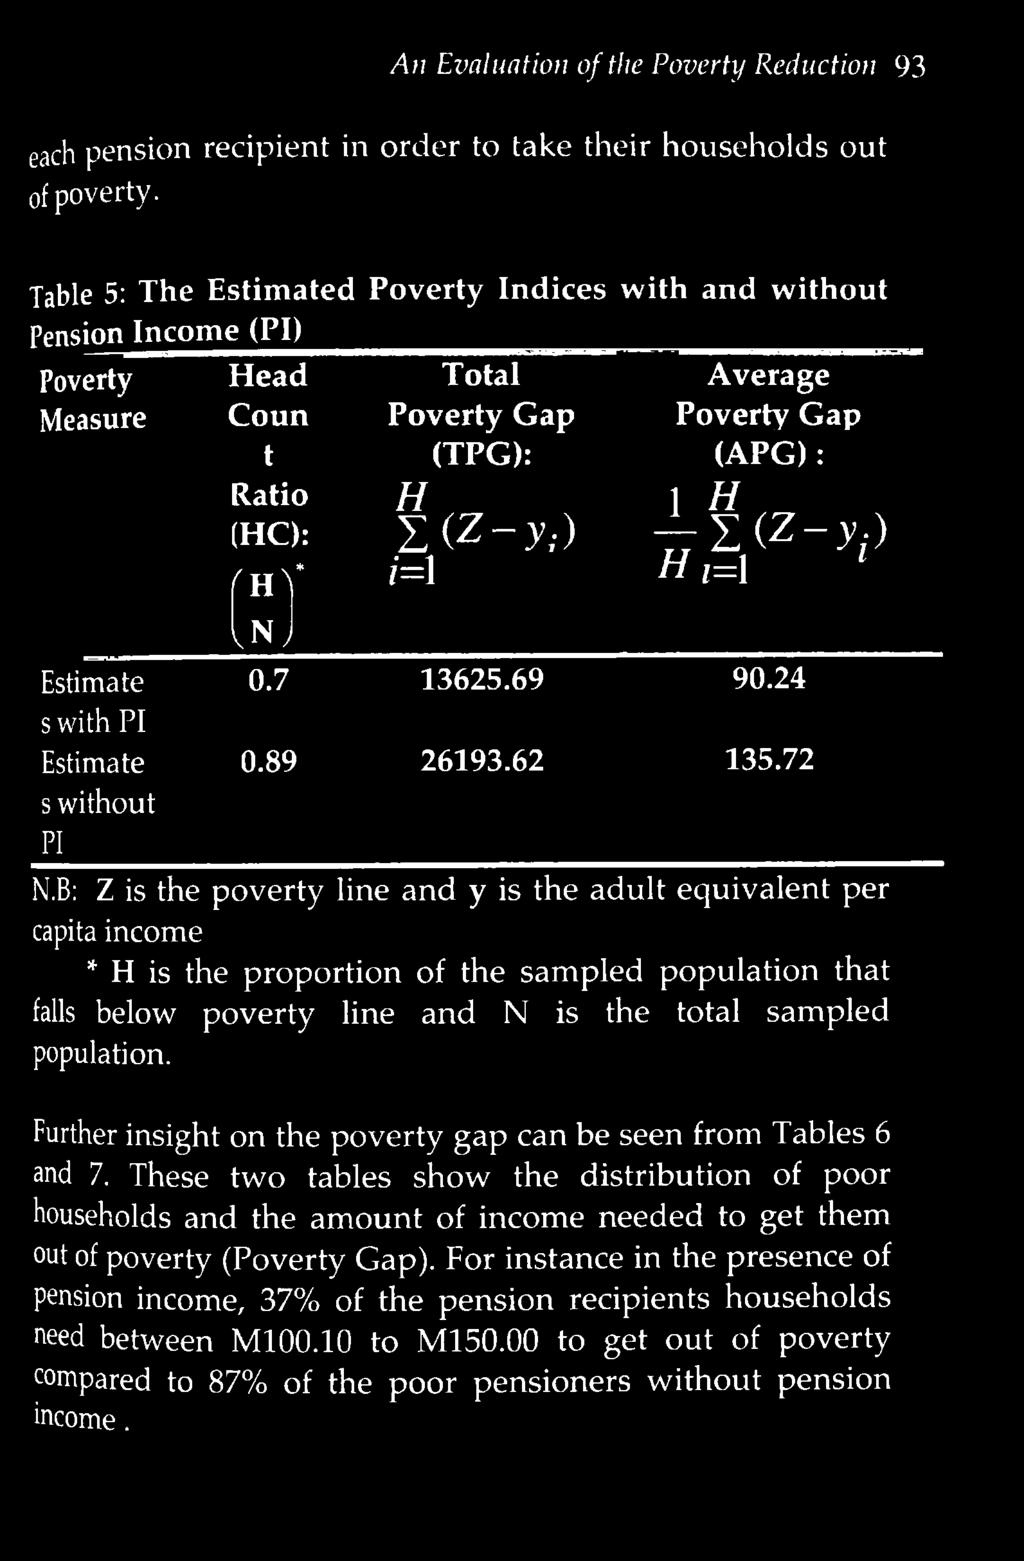 N is the total sampled Further insight on the poverty gap can be seen from Tables 6 and 7.